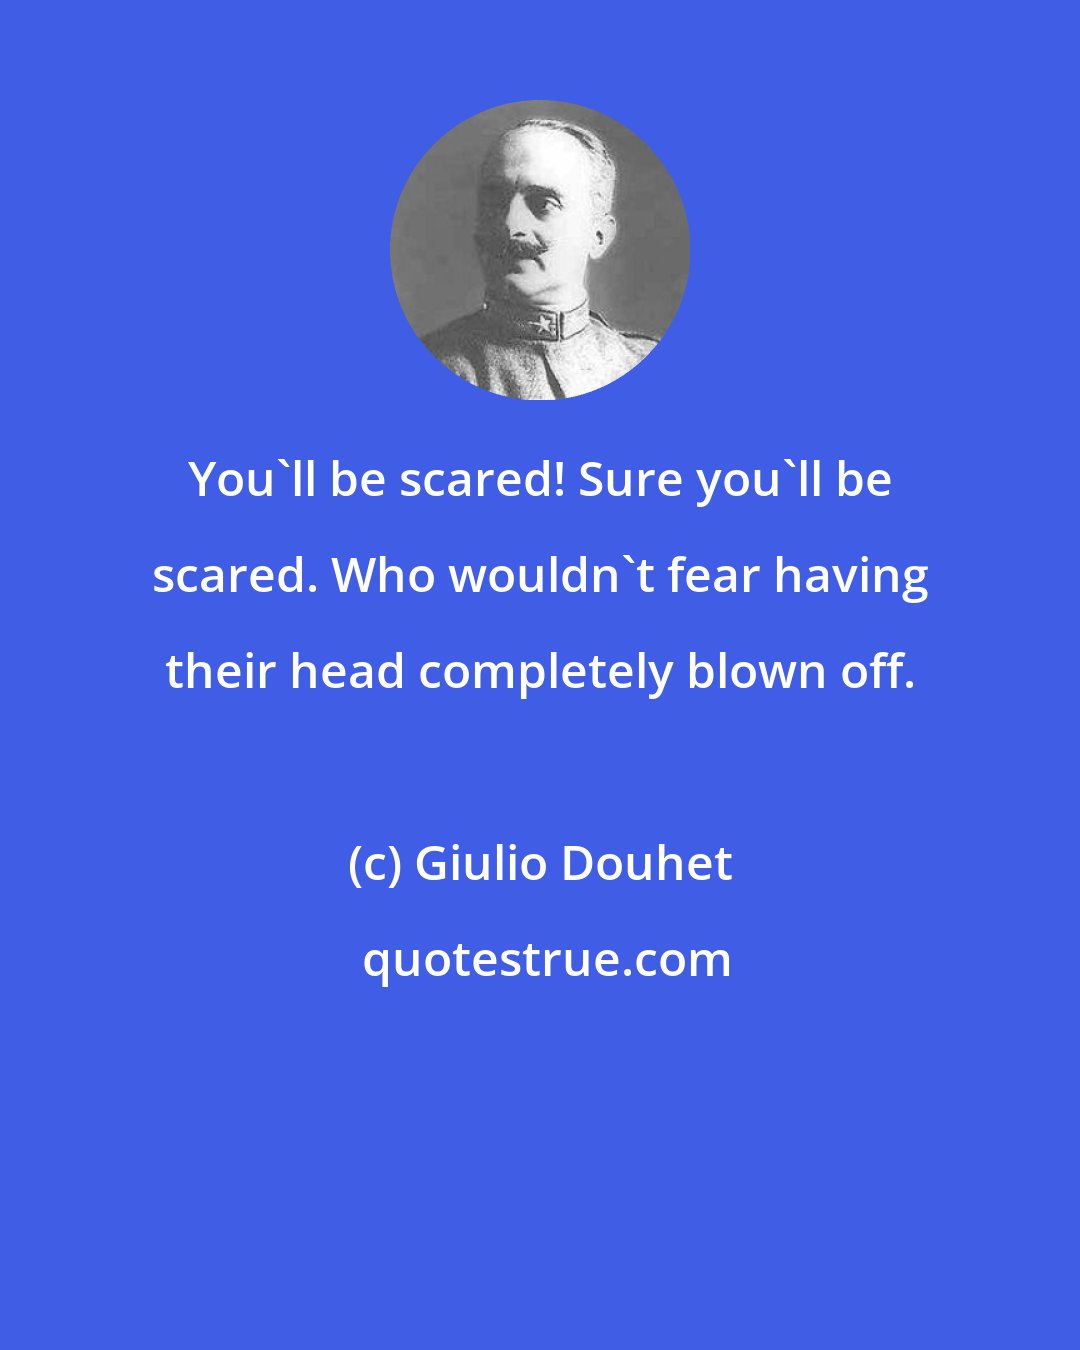 Giulio Douhet: You'll be scared! Sure you'll be scared. Who wouldn't fear having their head completely blown off.